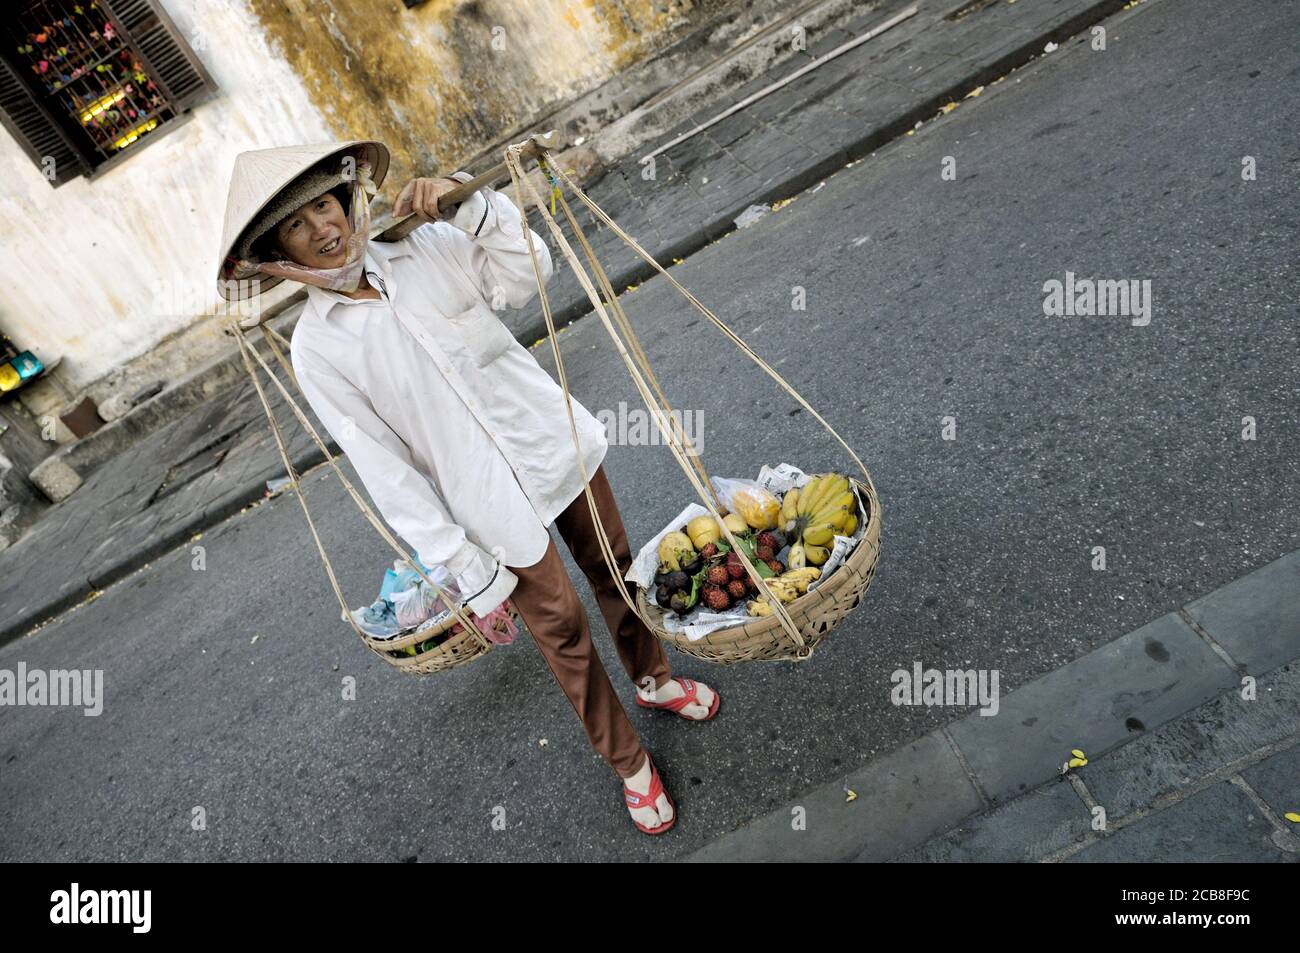 Woman carrying baskets of fruit in Hoi An, Vietnam Stock Photo